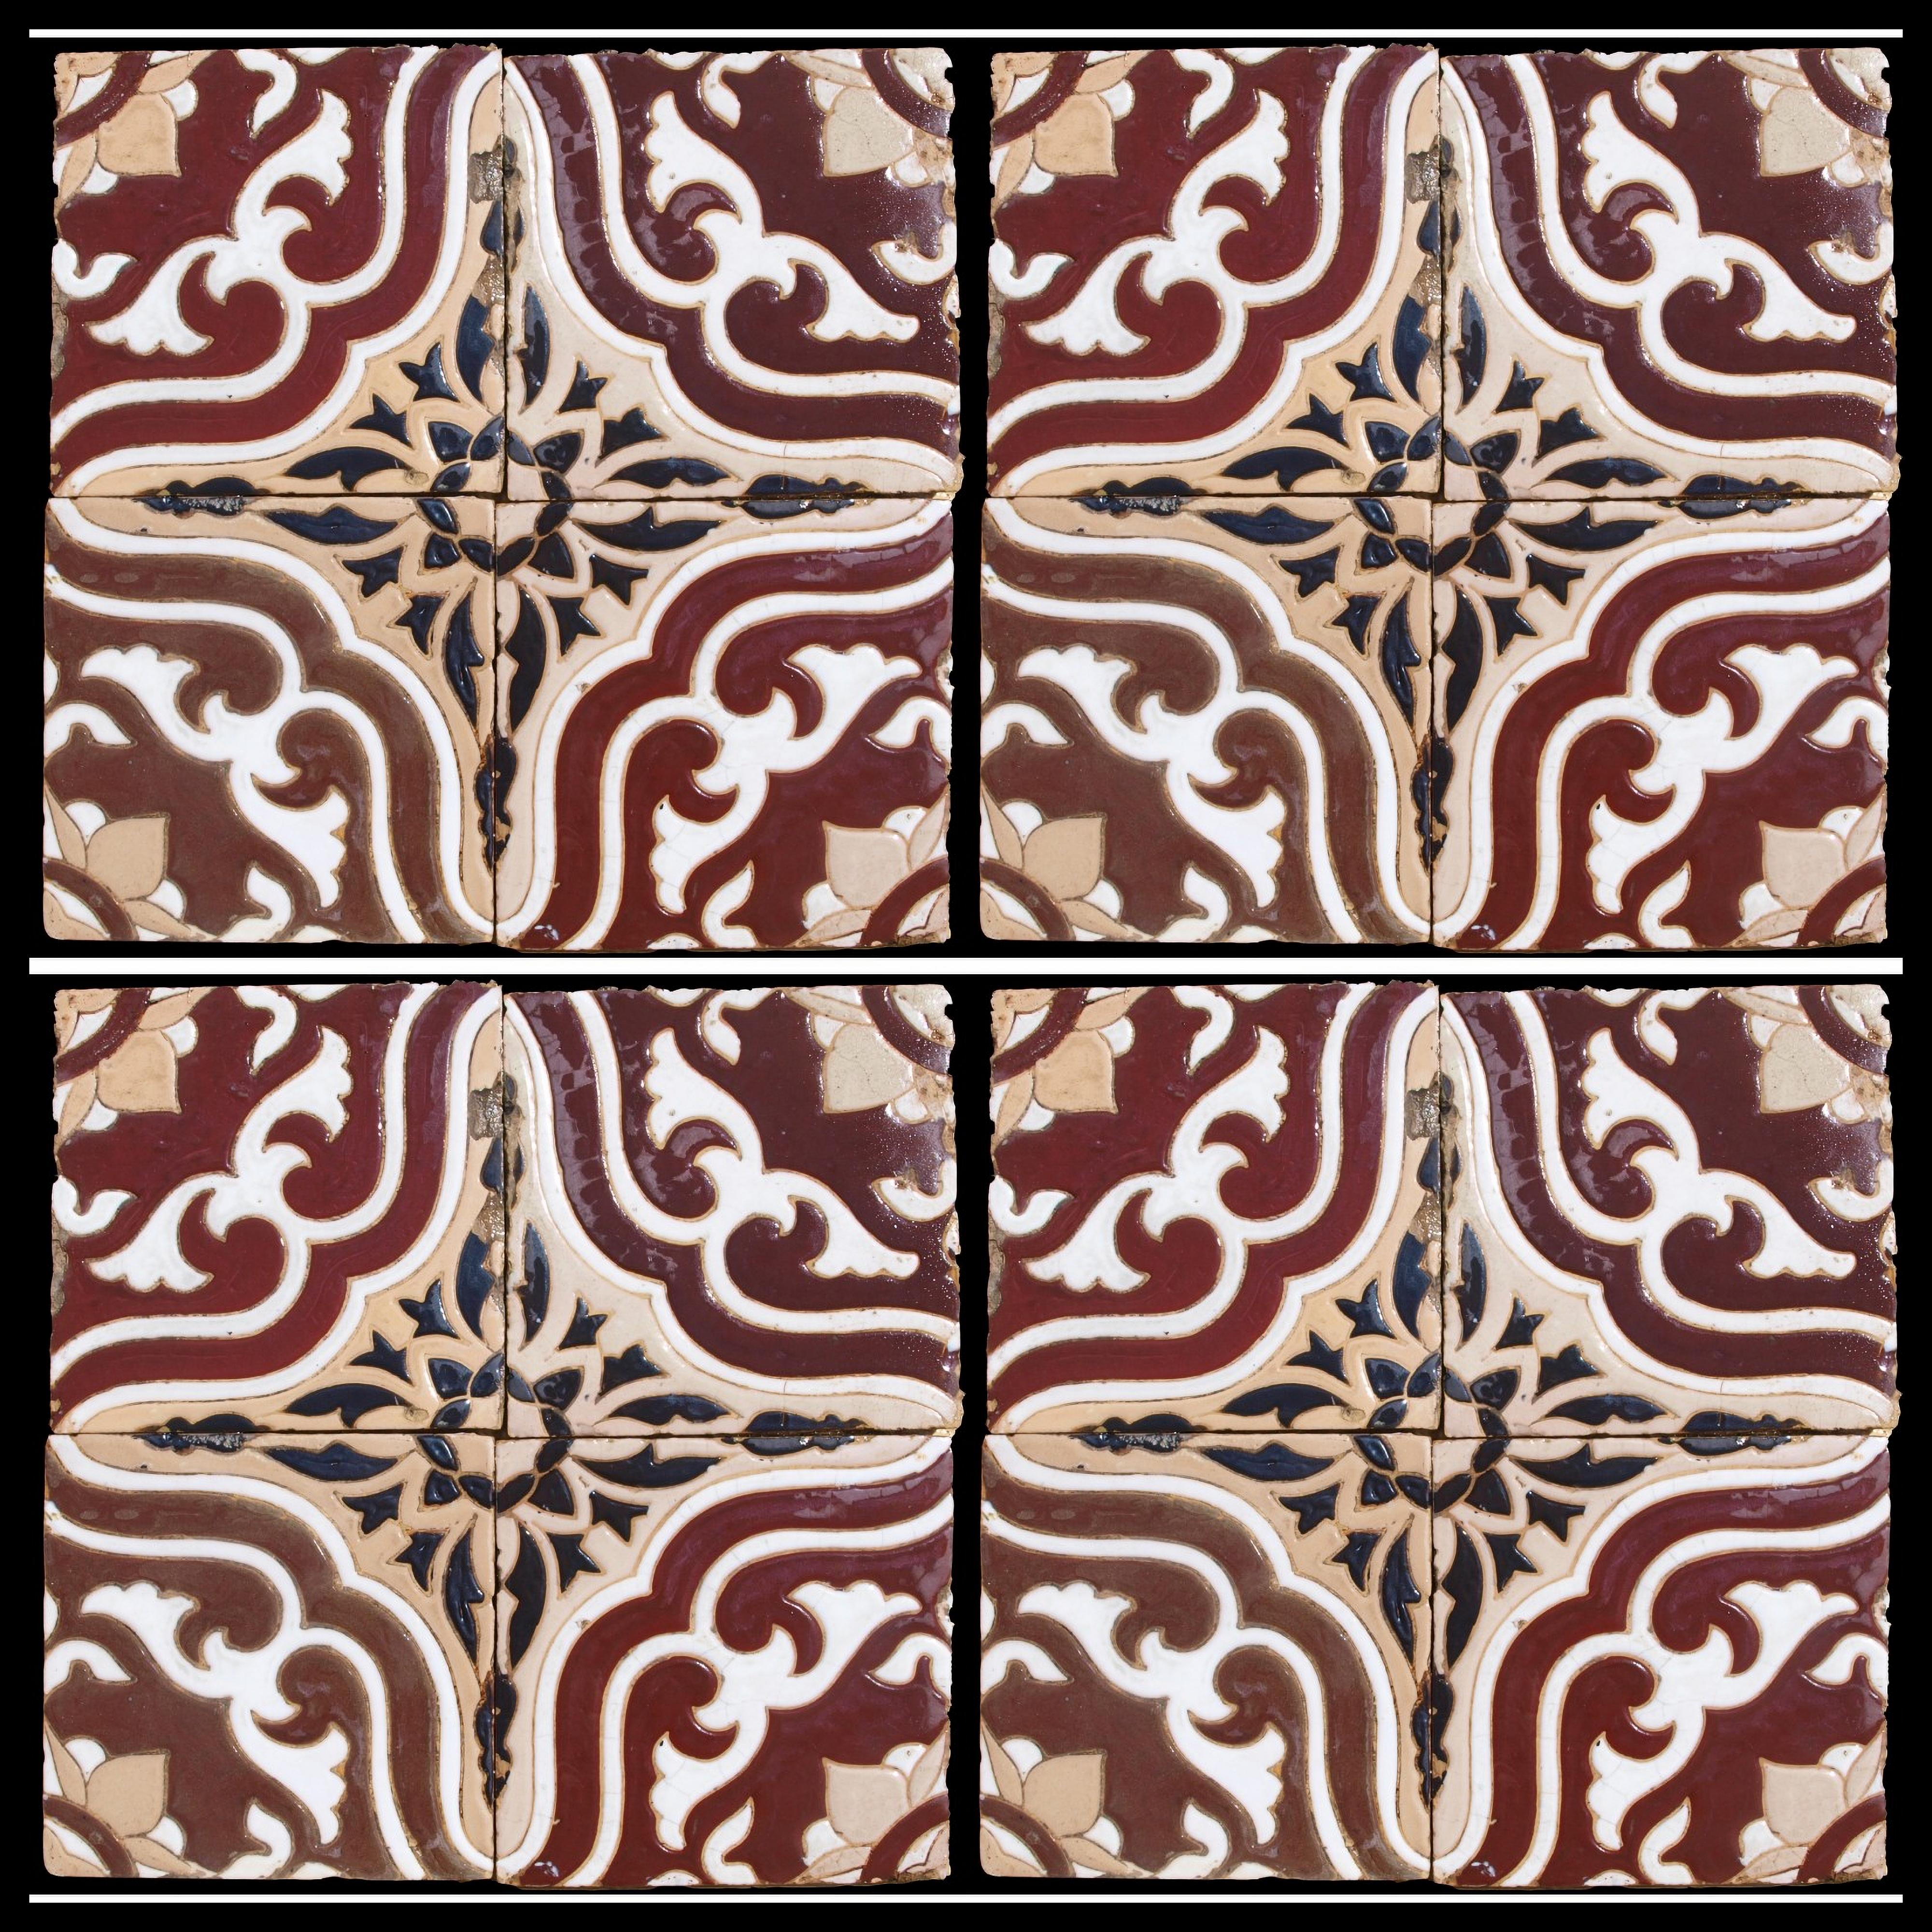 16 ANCIENT MAJOLICA TILES FROM THE LIBERTY ERA 1894 / 1910 Art Nouveau

Original white and manganese relief tile.
Relief tile.

AVAILABILITY OF 329 TILES

HEIGHT 80 cm
WIDTH 80 cm
THICKNESS 1.7 cm
WEIGHT 1.3 Kg
HISTORICAL PERIOD 1894 / 1910 Art